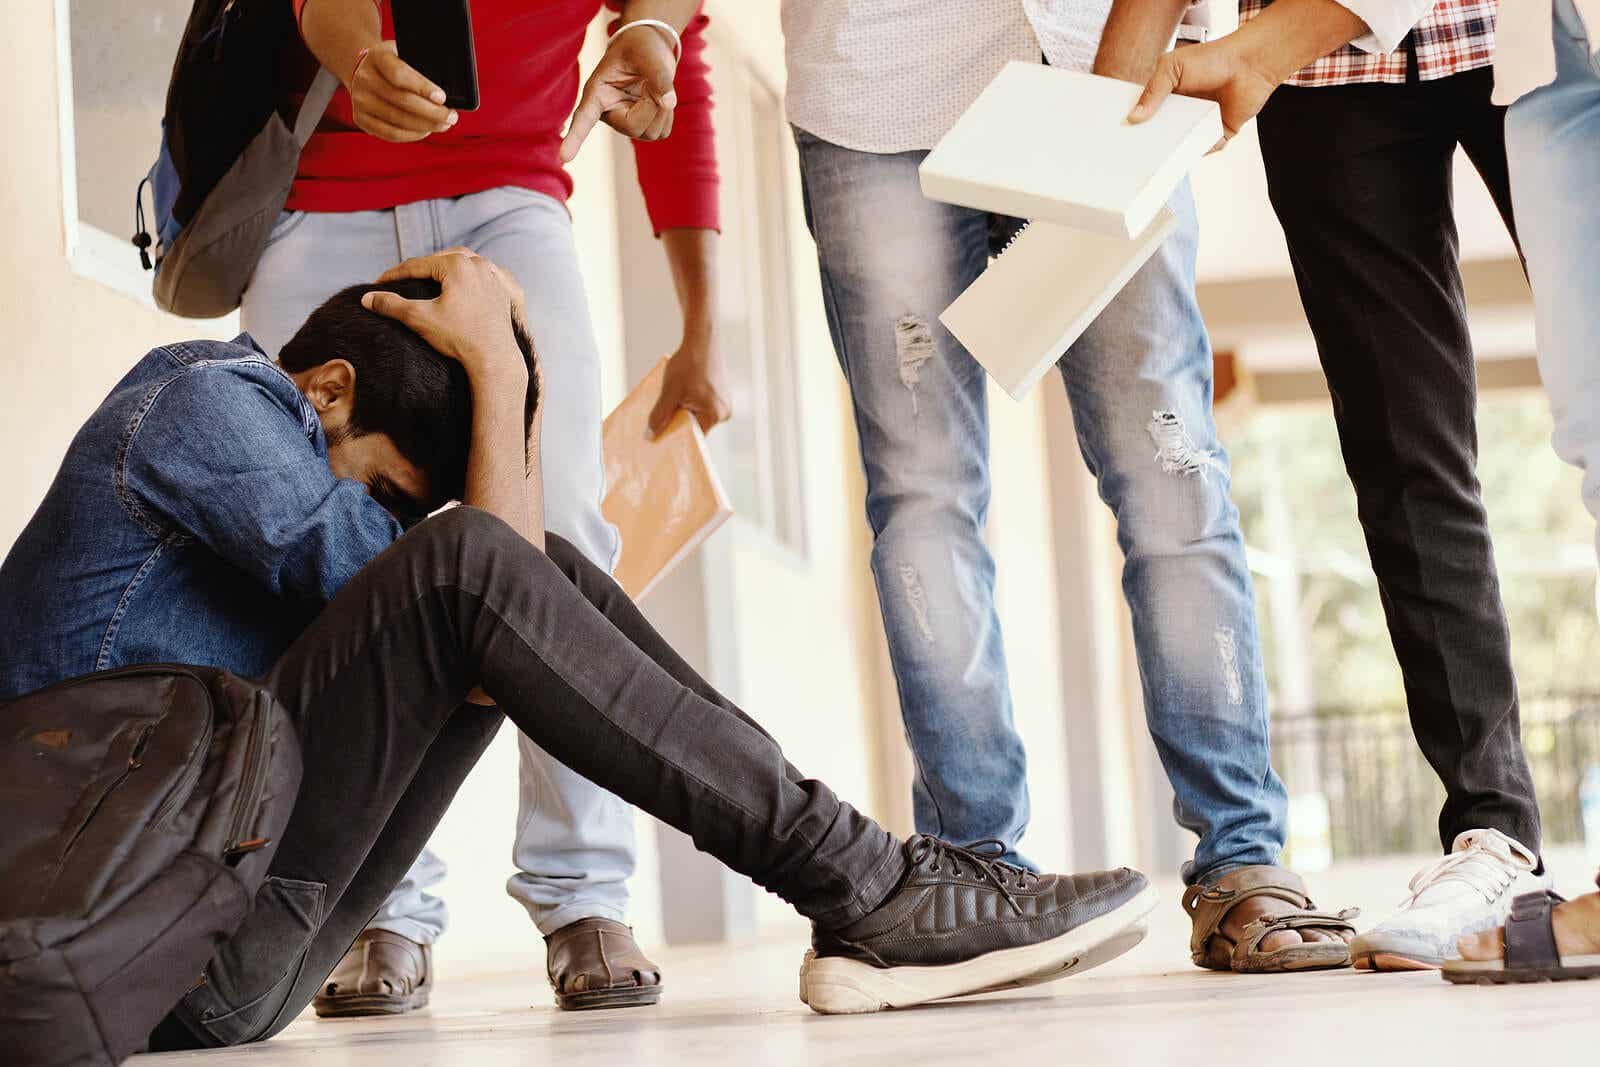 A teenage boy sitting on the floor at school, surrounded by a group of bullies.